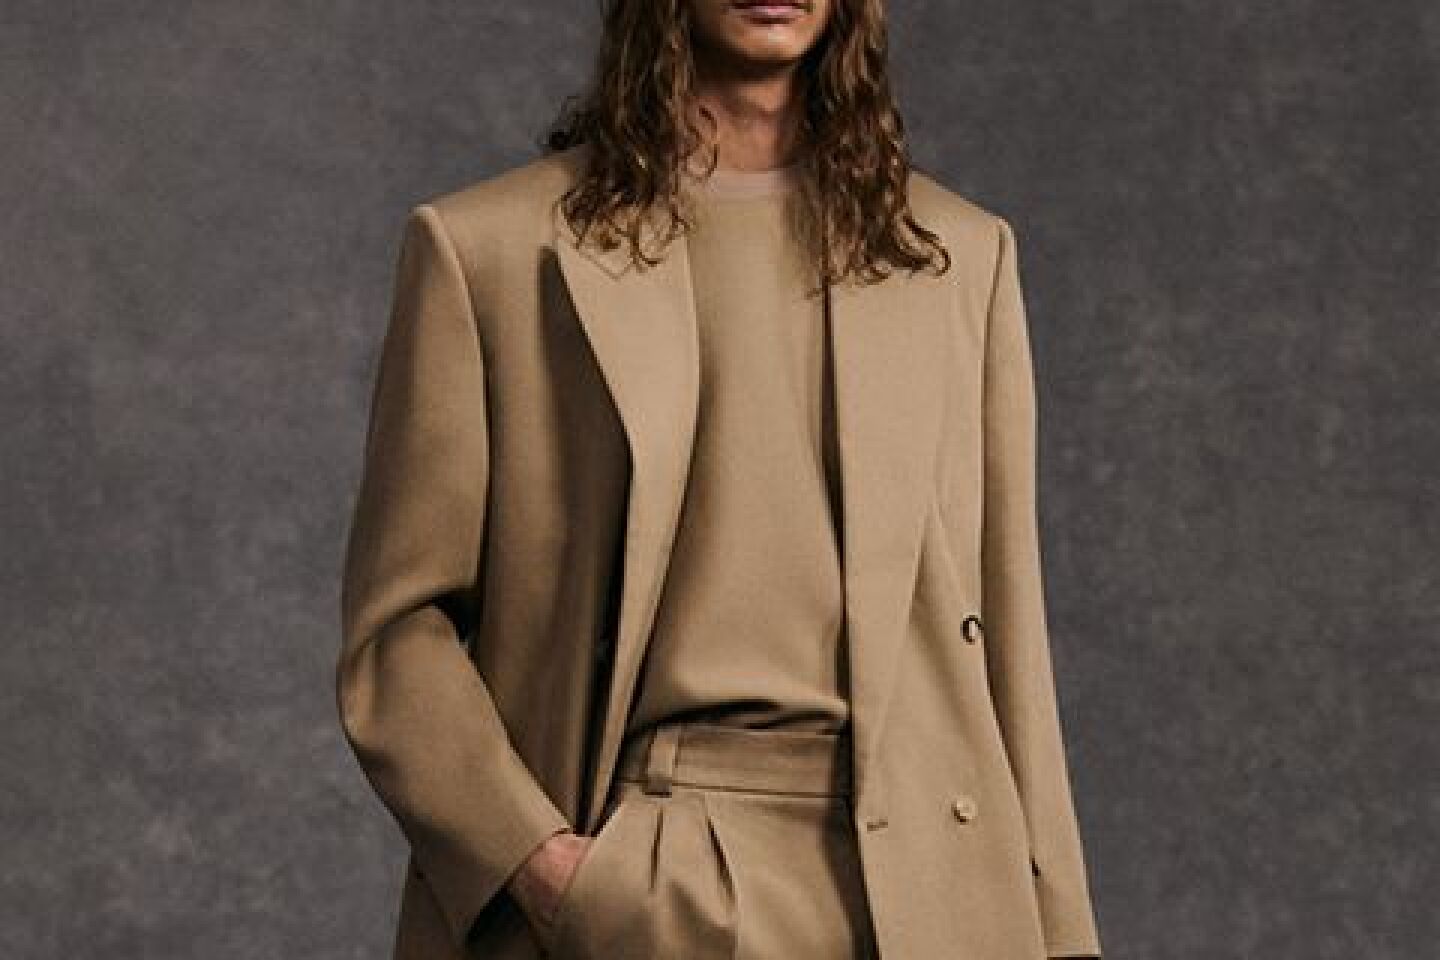 Nordstrom Concept 13 Fear of God tailoring.jpeg